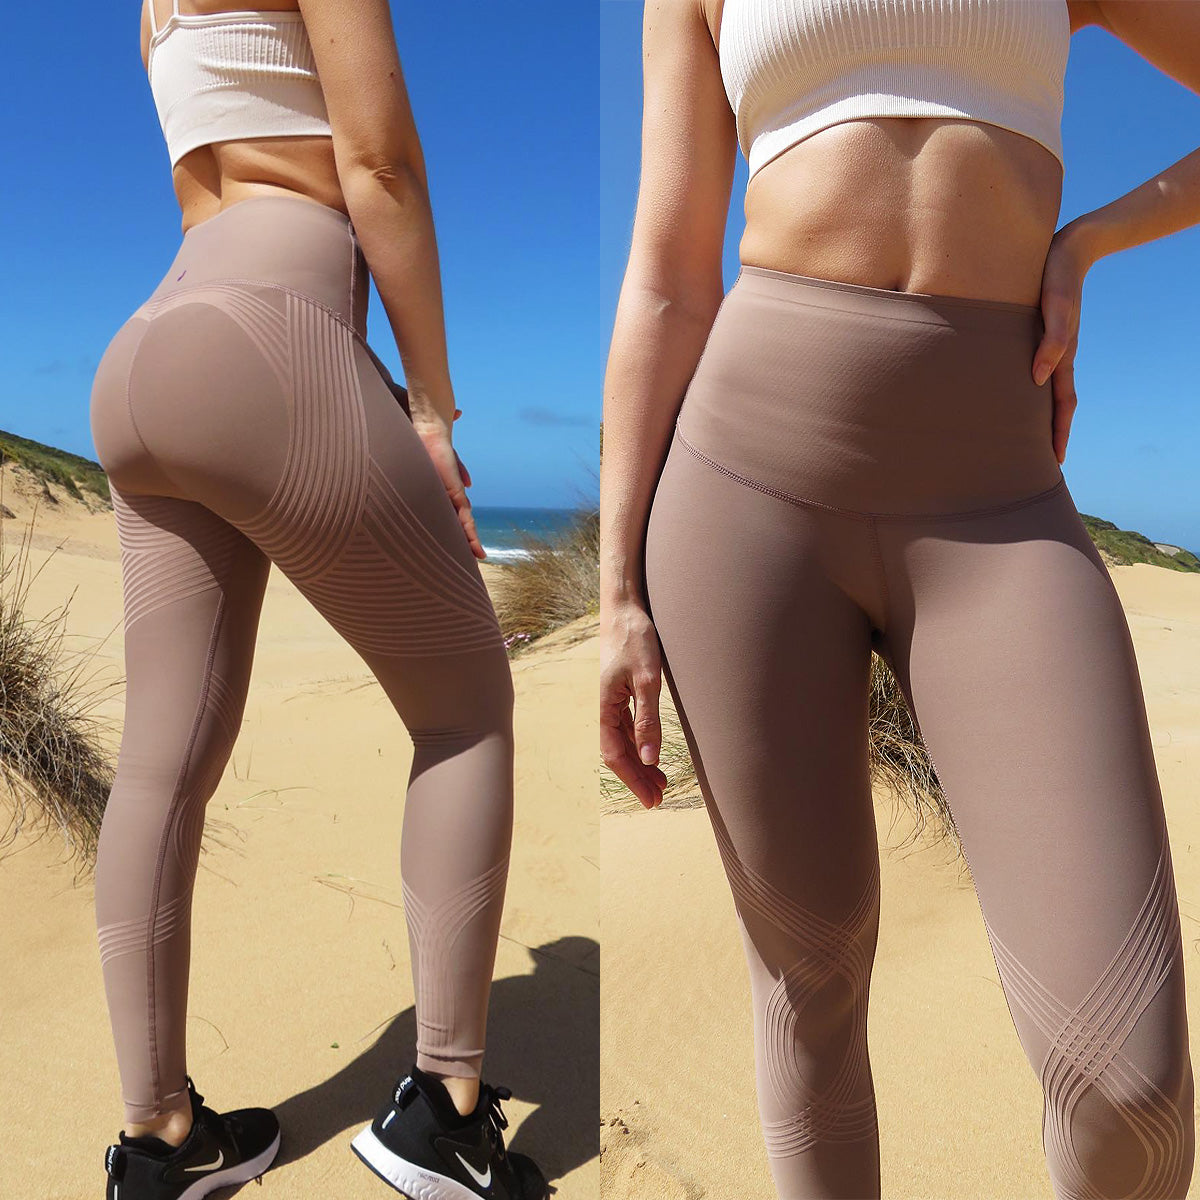 Try These Compression Leggings Designed For Thick Thighs and Cellulite –  Fanka